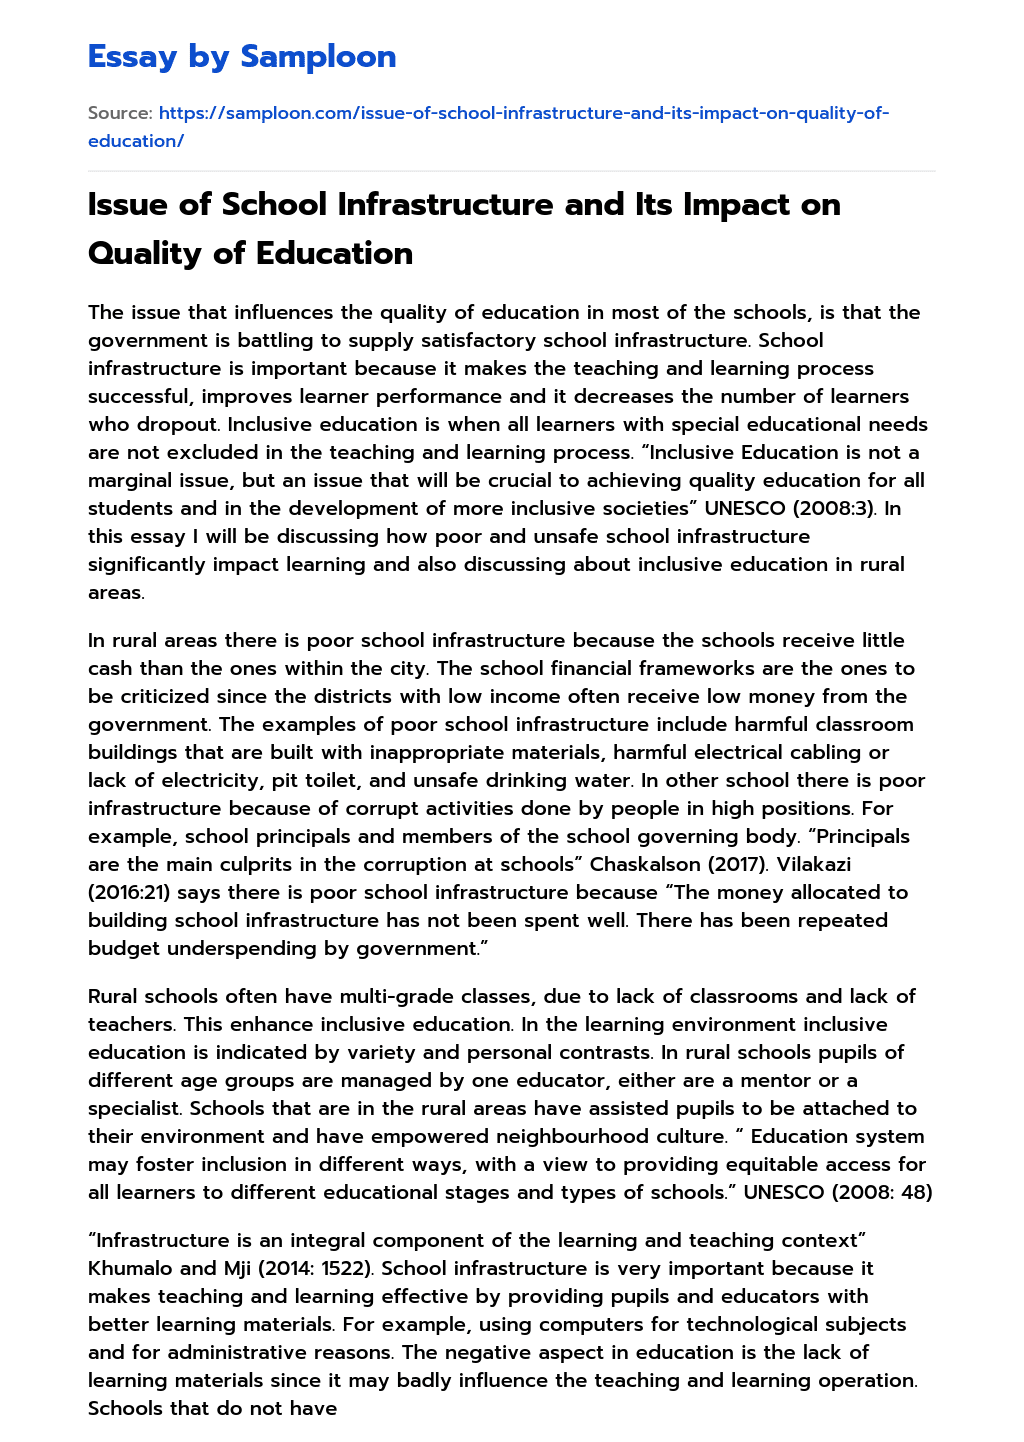 Issue of School Infrastructure and Its Impact on Quality of Education essay